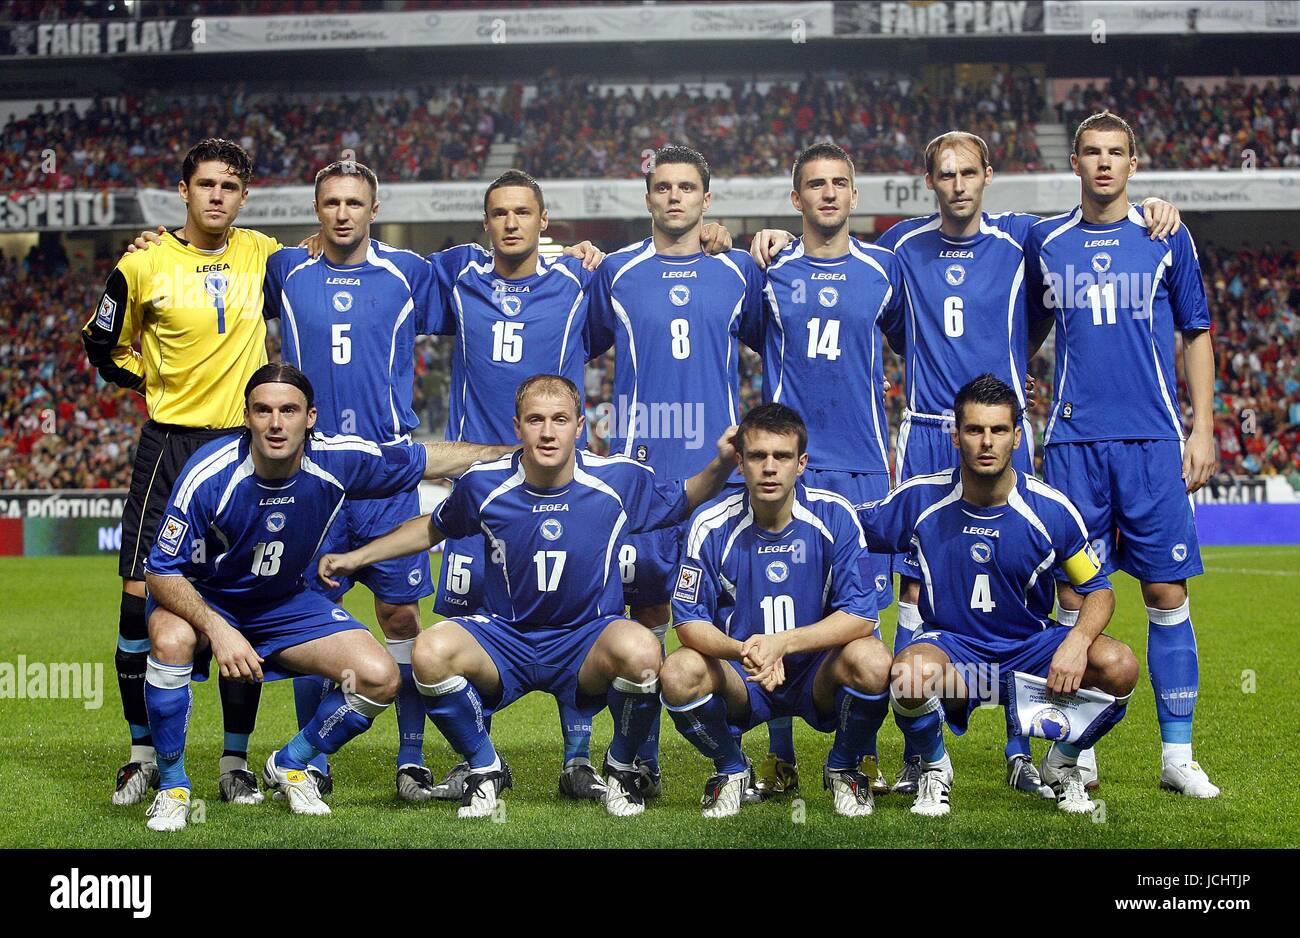 BOSNIA-HERZEGOVINA BOSNIA TEAM GROUP PORTUGAL V BOSNIA ESTADIO DA LUZ, LISBON, PORTUGAL 14 November 2009 GAA3573     WARNING! This Photograph May Only Be Used For Newspaper And/Or Magazine Editorial Purposes. May Not Be Used For, Internet/Online Usage Nor For Publications Involving 1 player, 1 Club Or 1 Competition, Without Written Authorisation From Football DataCo Ltd. For Any Queries, Please Contact Football DataCo Ltd on +44 (0) 207 864 9121 Stock Photo